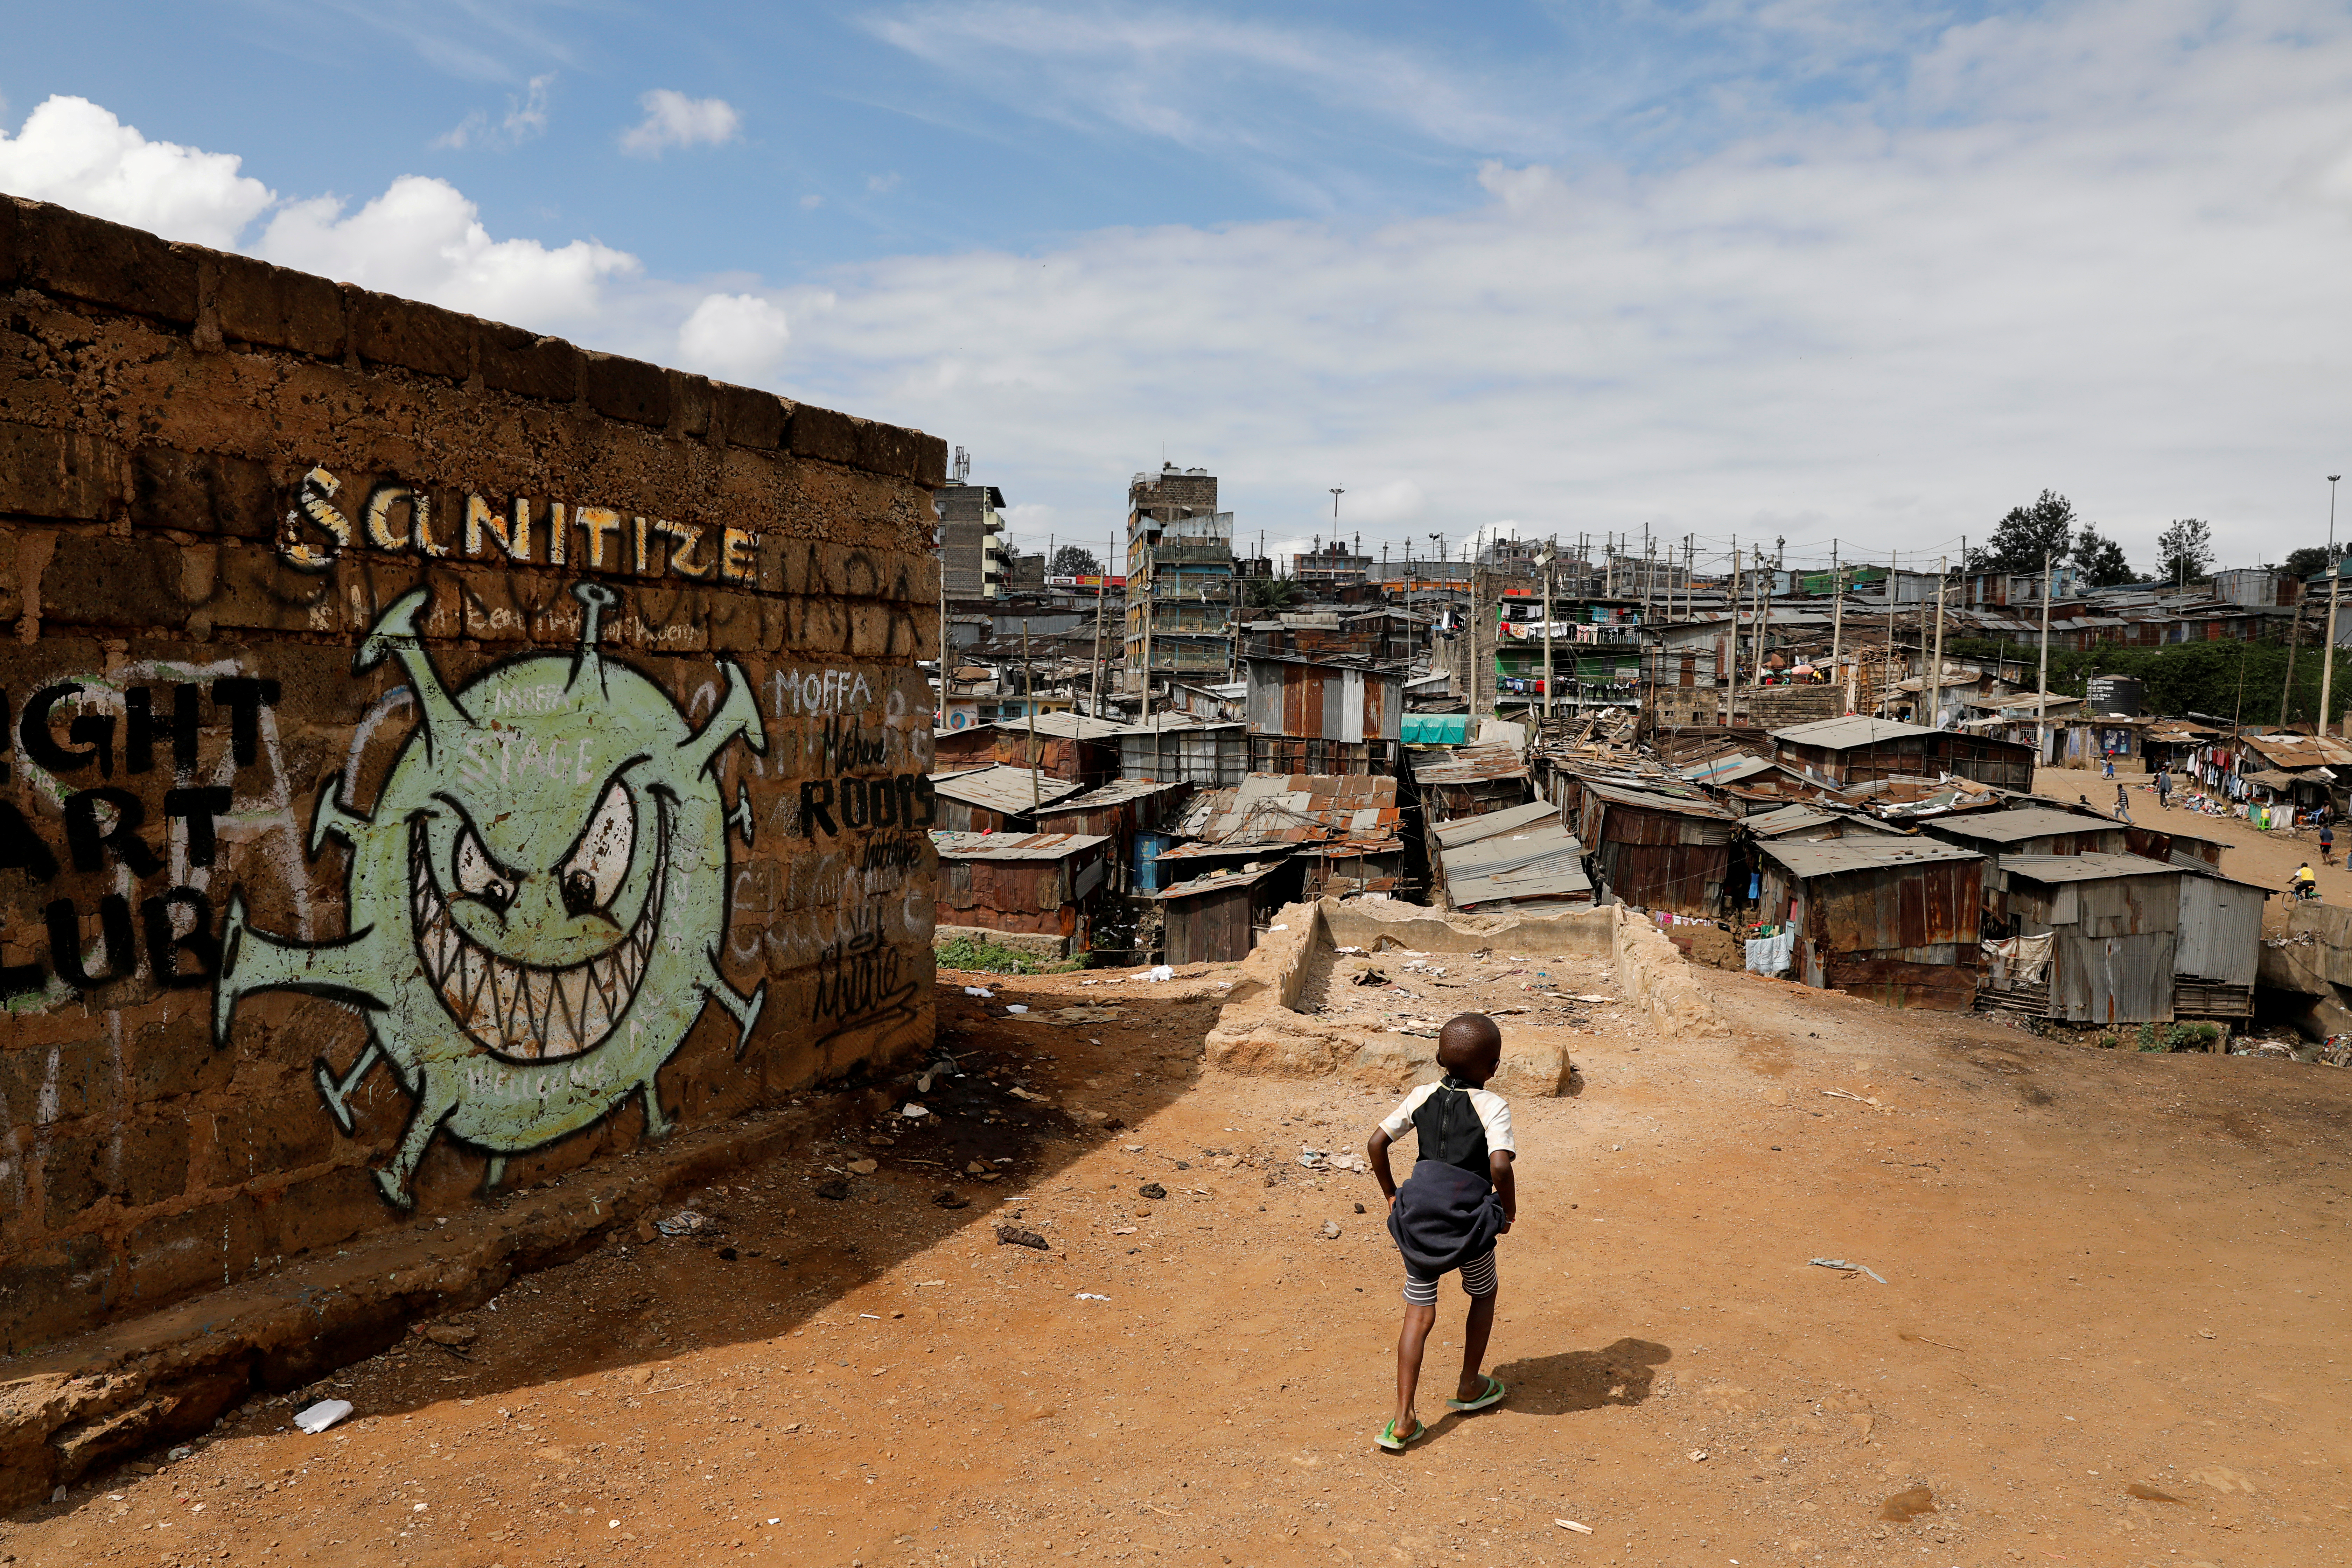 FILE PHOTO: A boy walks in front of graffiti promoting the fight against the coronavirus disease in the Mathare slums of Nairobi